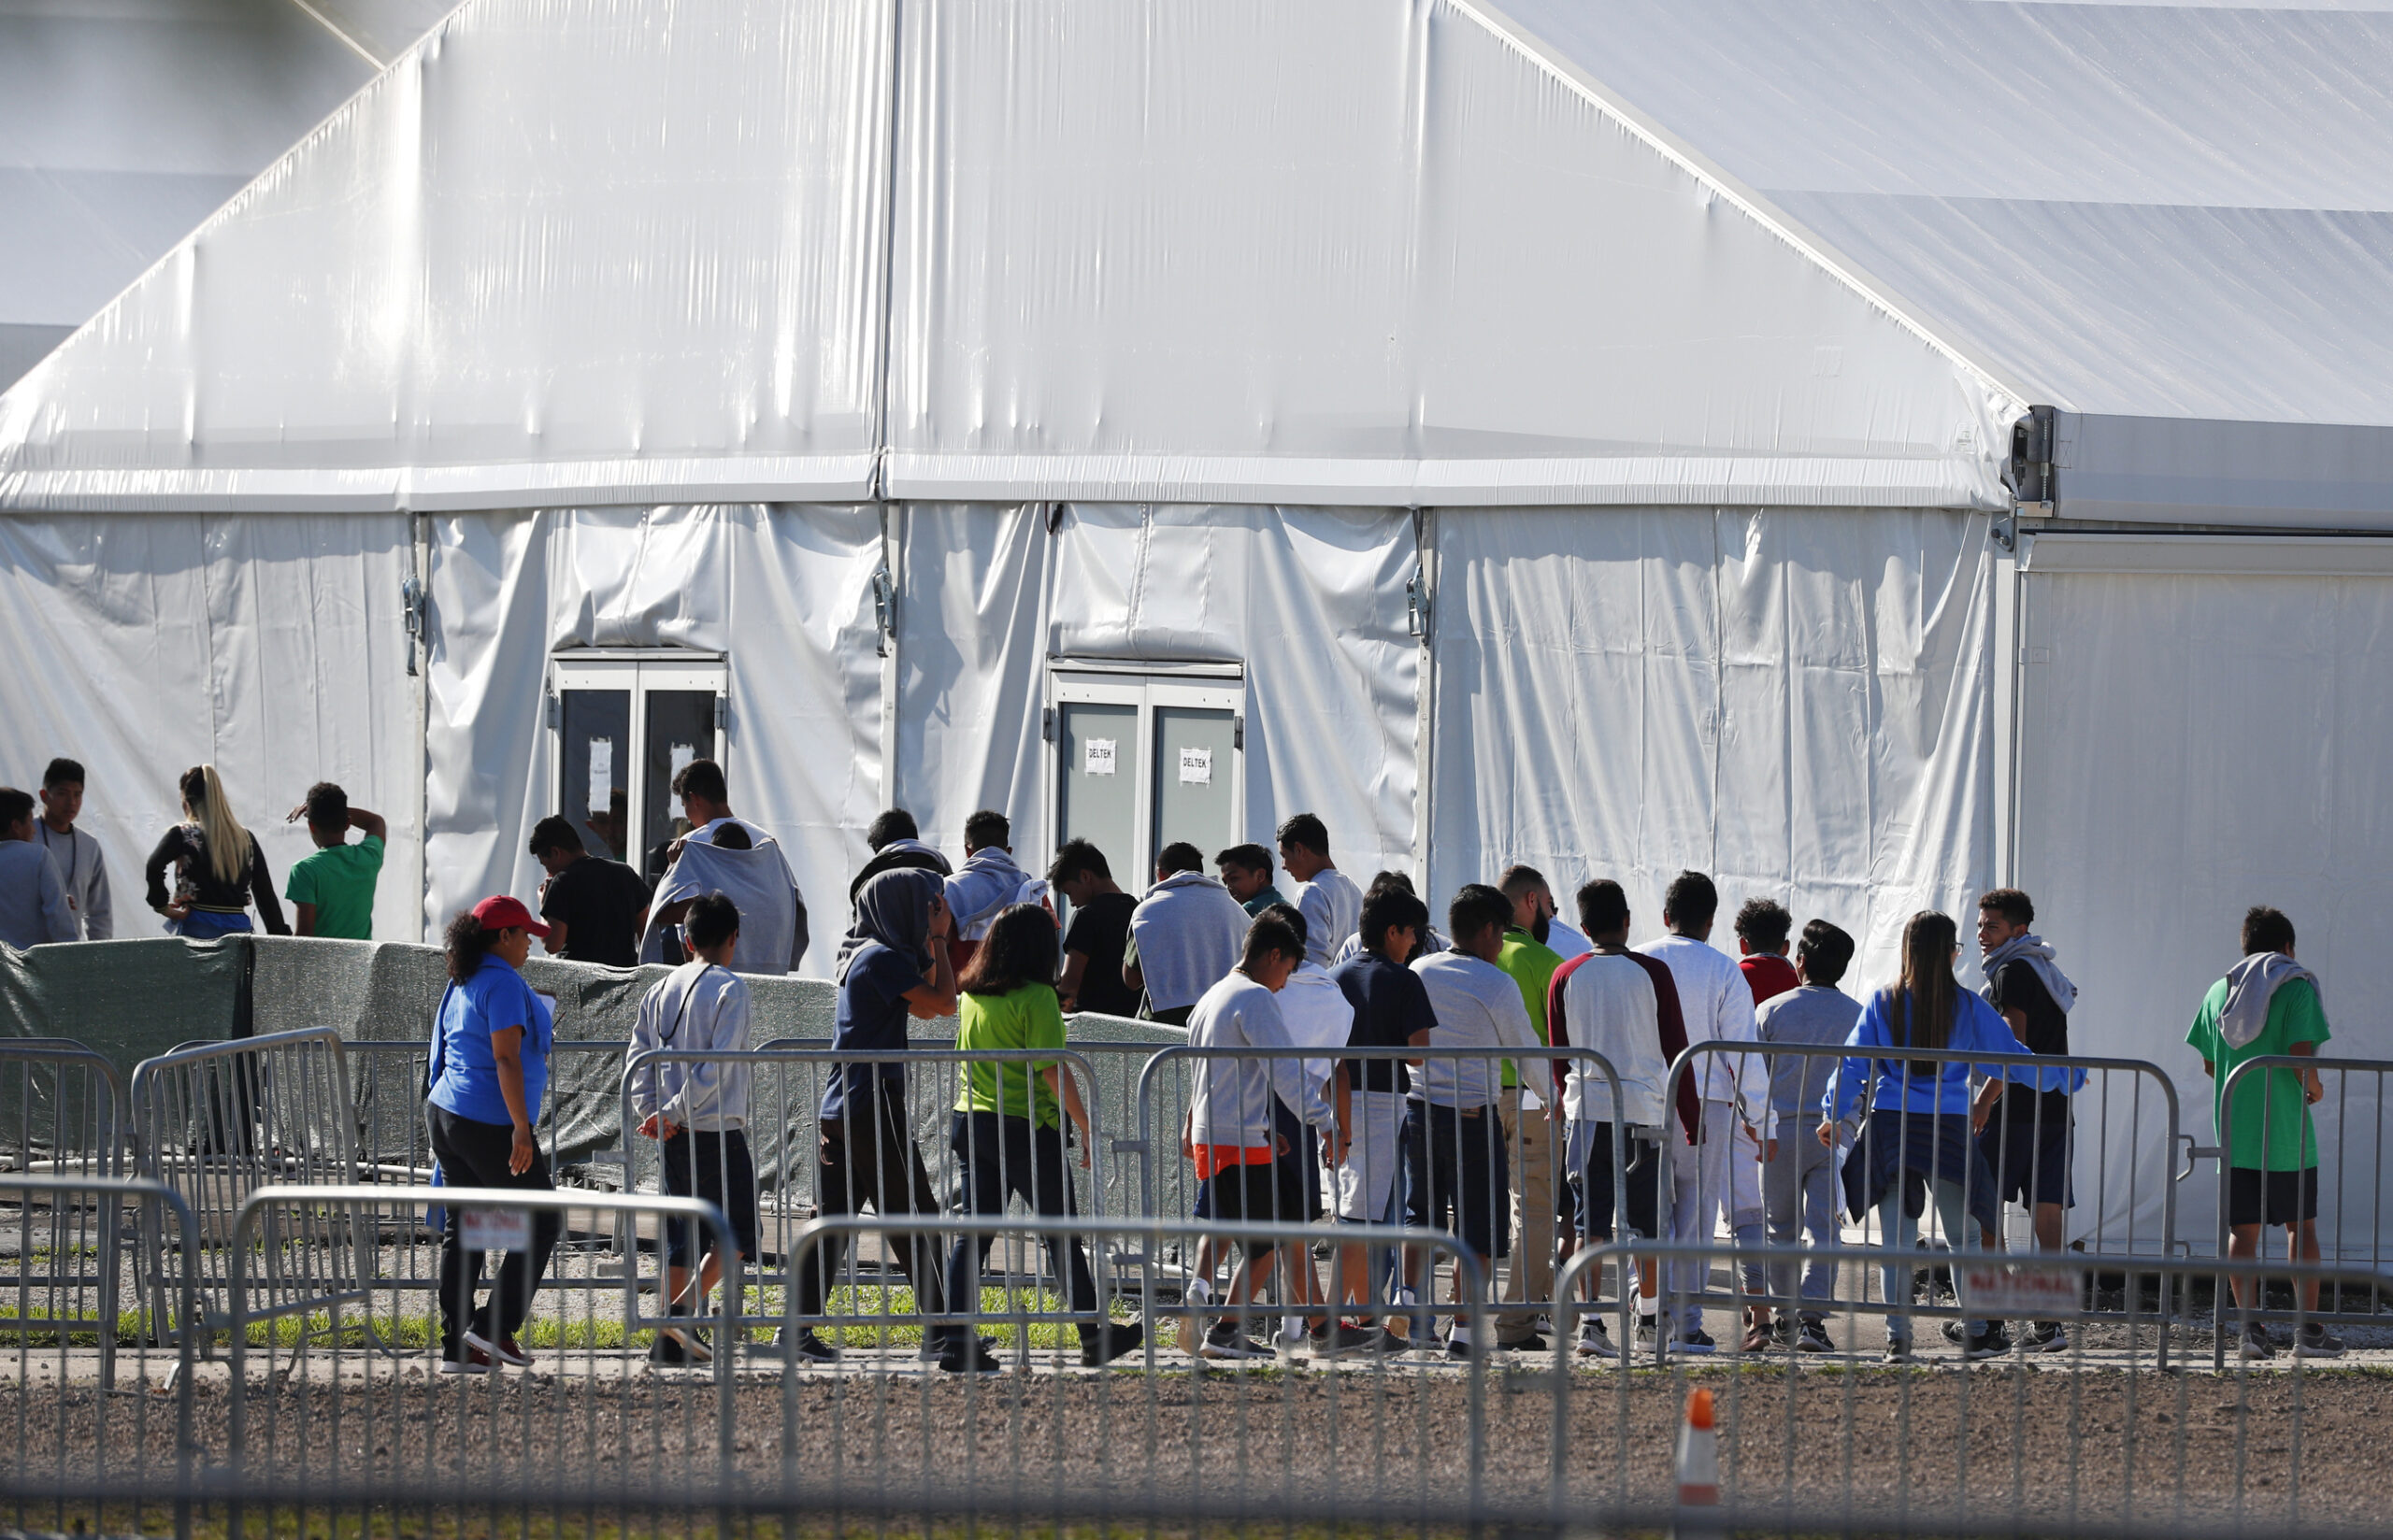 FILE- In this Feb. 19, 2019, file photo, children line up to enter a tent at the Homestead Temporary Shelter for Unaccompanied Children in Homestead, Fla. Despite efforts by the Trump administration to improve communication to track children who are separated from their families at the border, the process is still vulnerable to error and information sharing between agencies is inconsistent, raising questions on the accuracy of current data, a watchdog reported Thursday. (AP Photo/Wilfredo Lee, File)